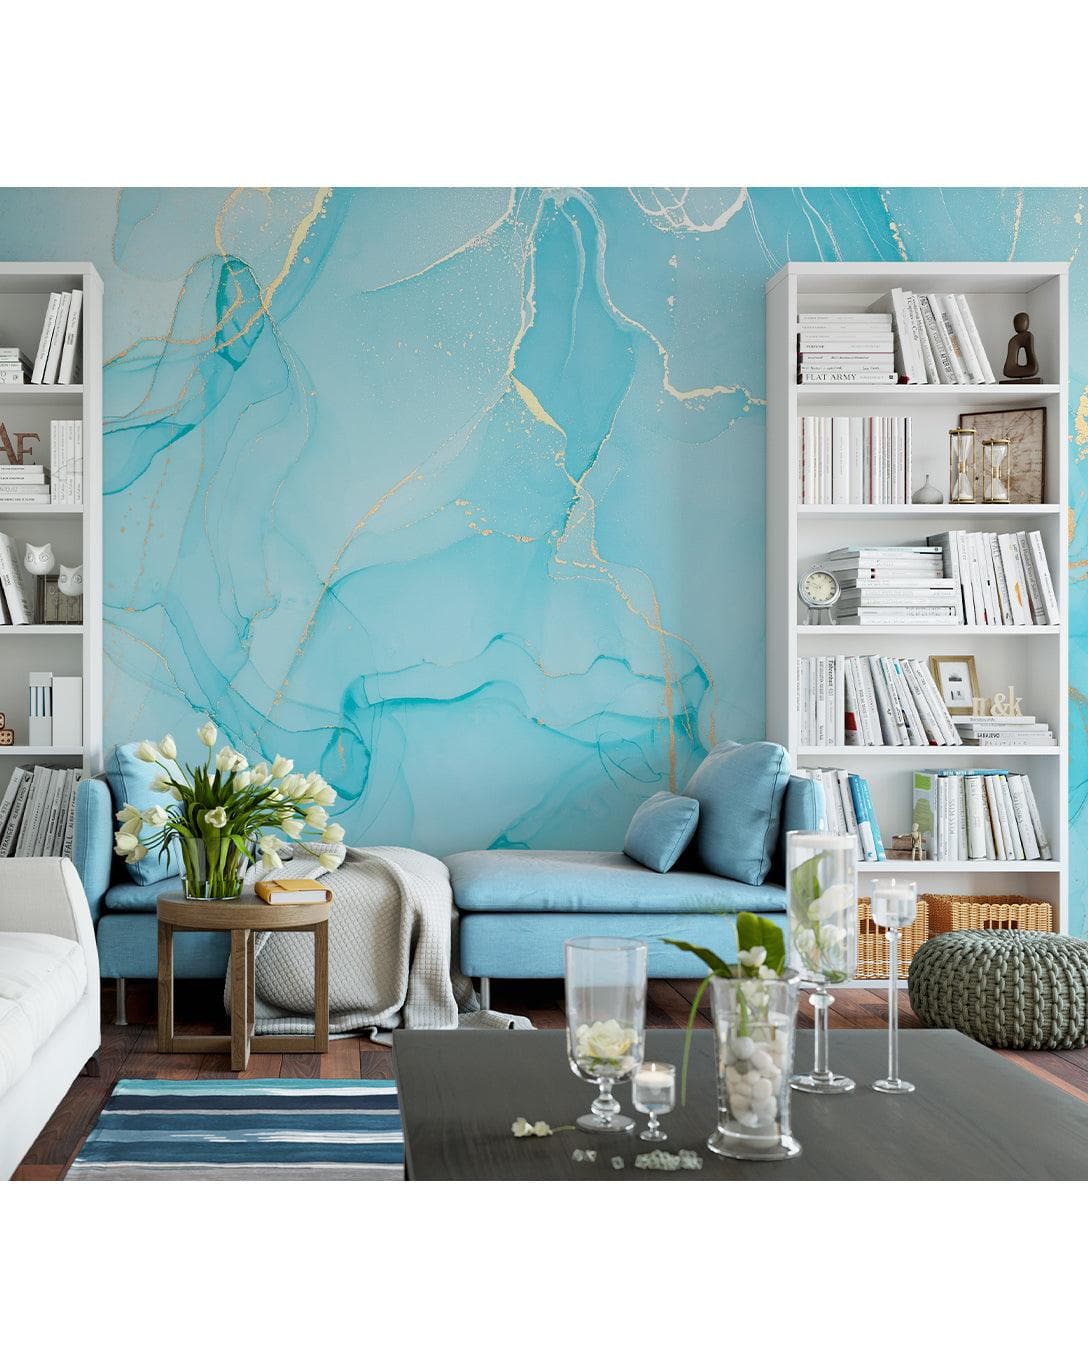 Blue Watercolor Paint Abstract Marble Wall Mural Blue Watercolor Paint Abstract Marble Wall Mural Blue Watercolor Abstract Alcohol Ink Marble Wall Mural Dcal 